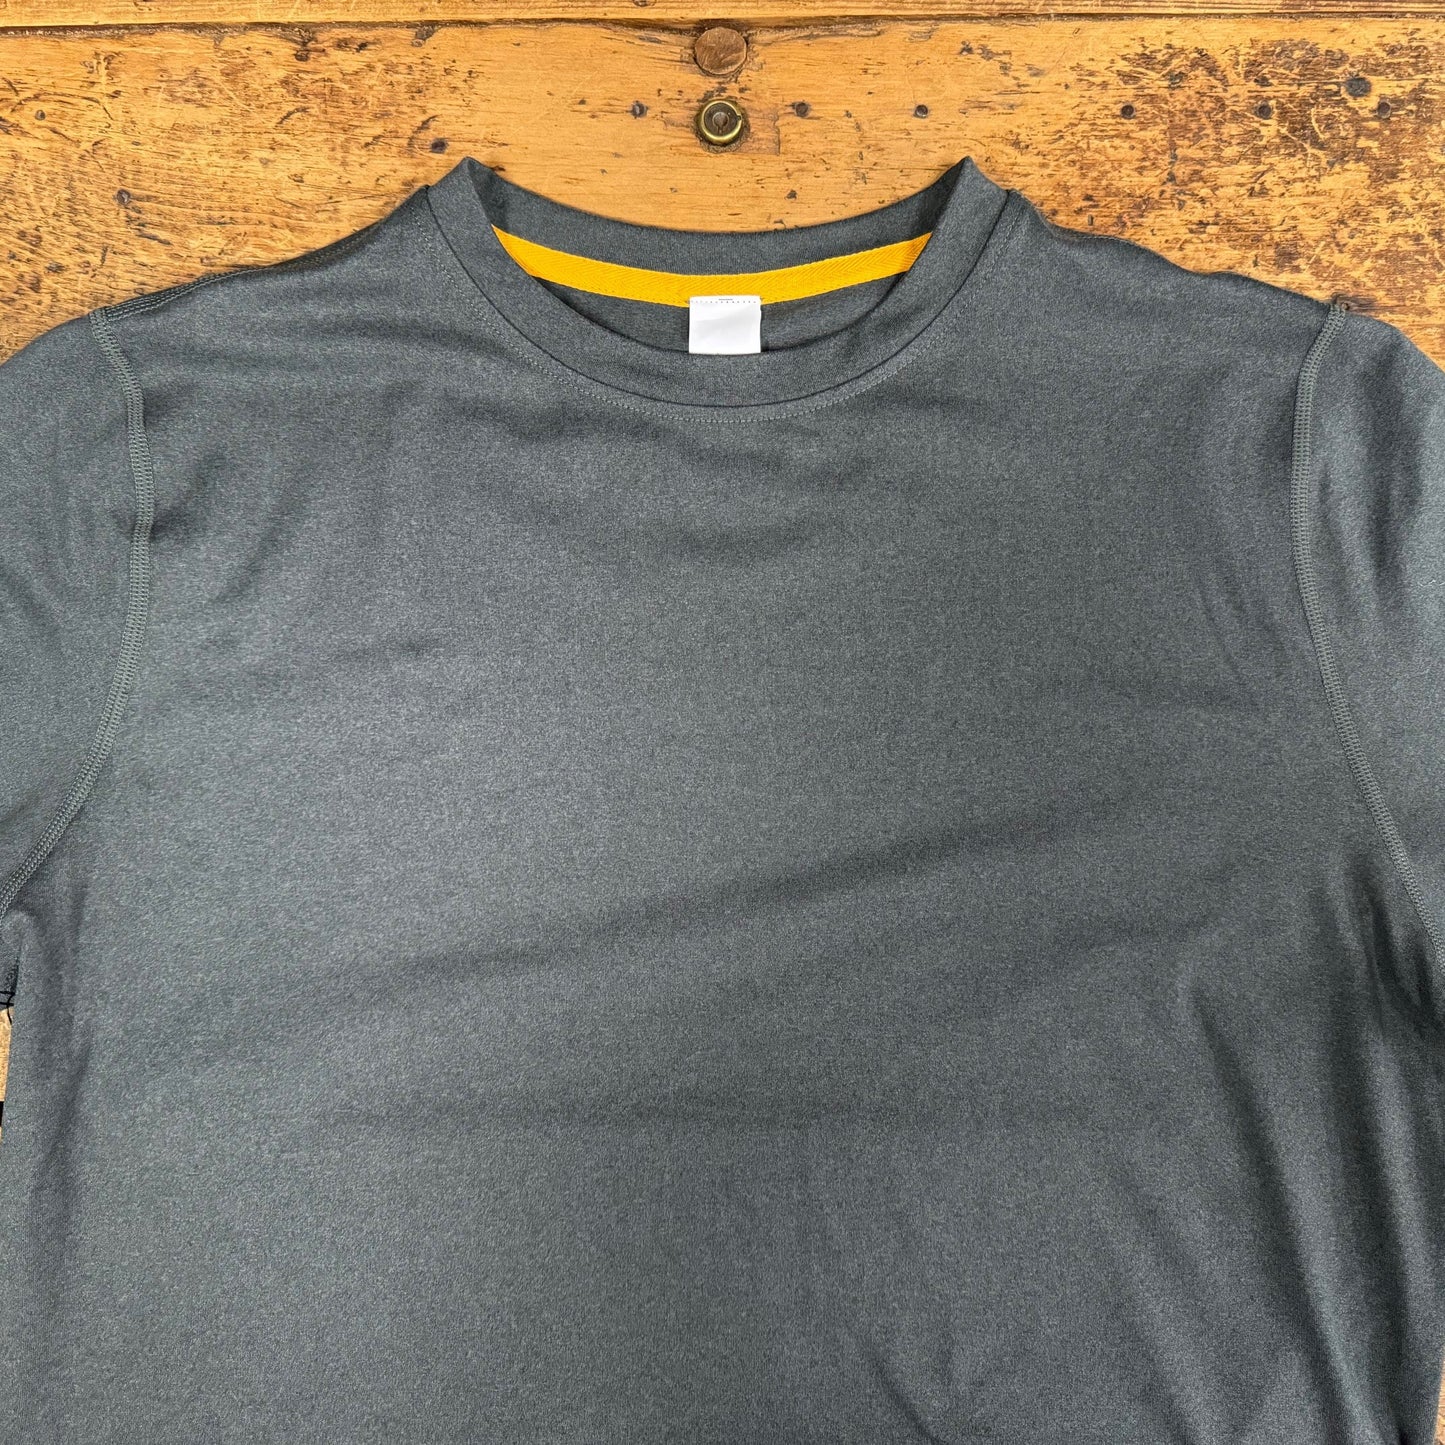 The Crafted Stag Supply Performance Tech Crewneck